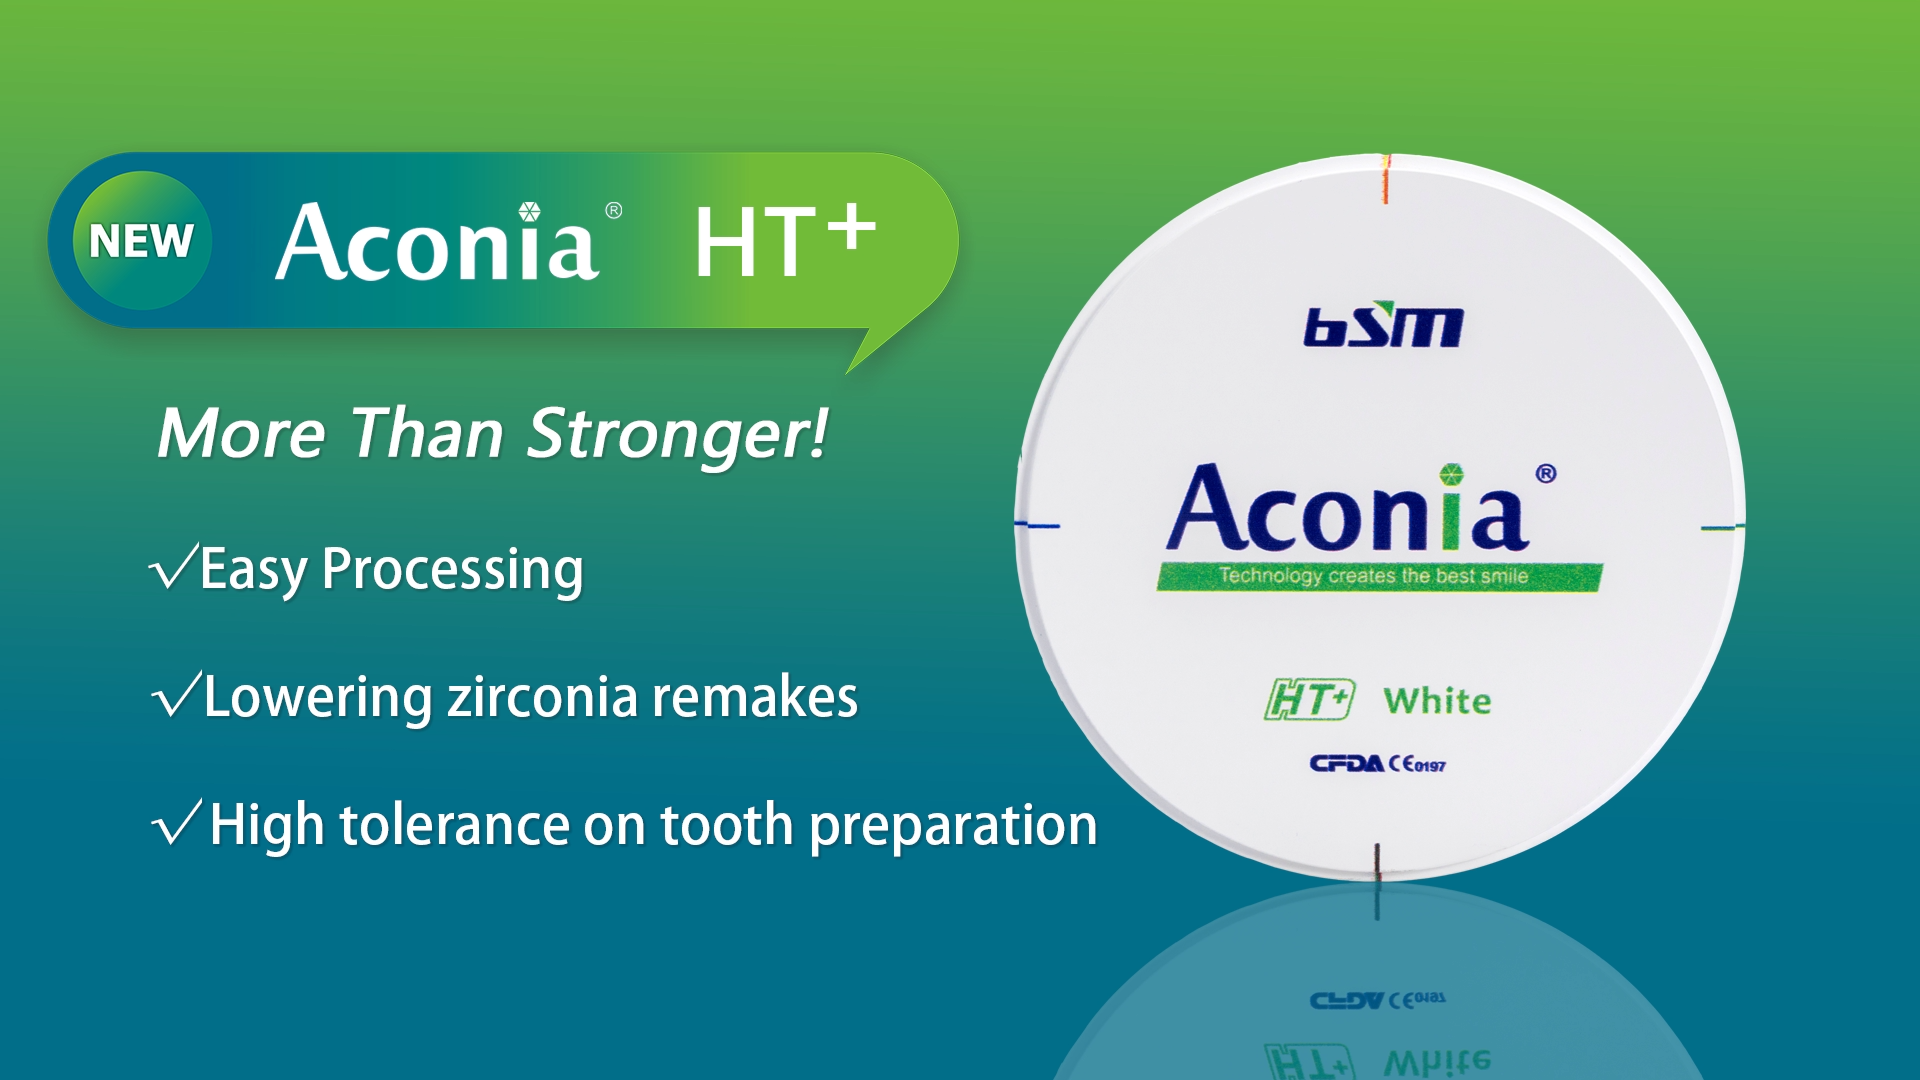 What makes Aconia HT+ superior than other zirconia blanks?